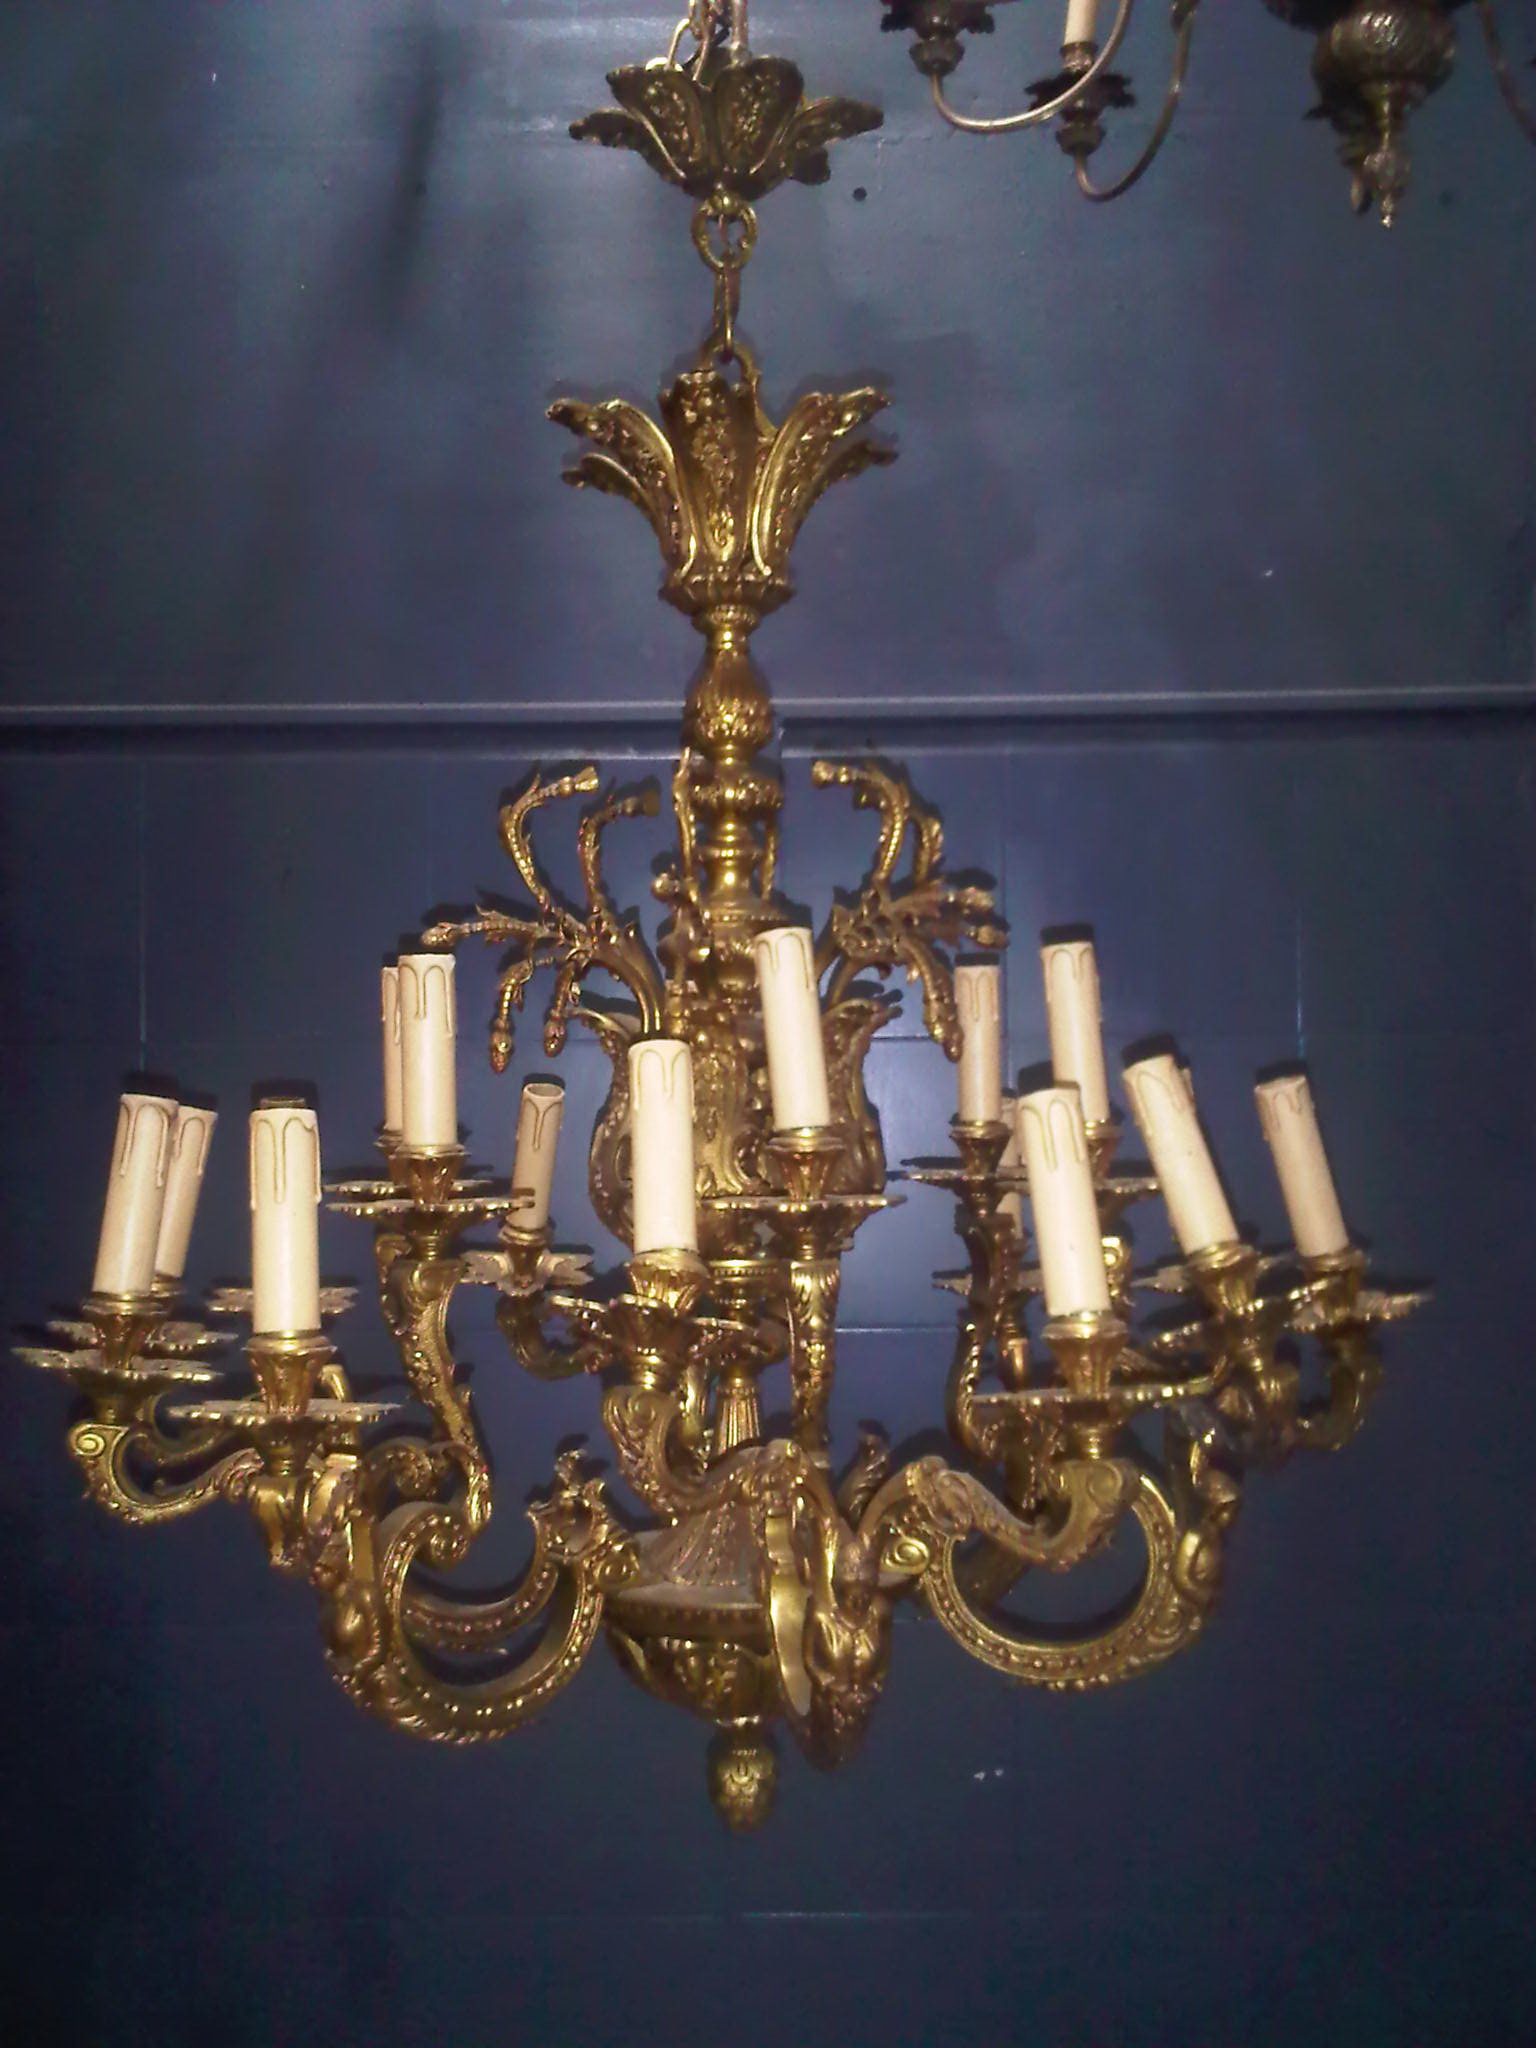 Antique Lamp code AT100G size wide 84 cm high 100 cm.